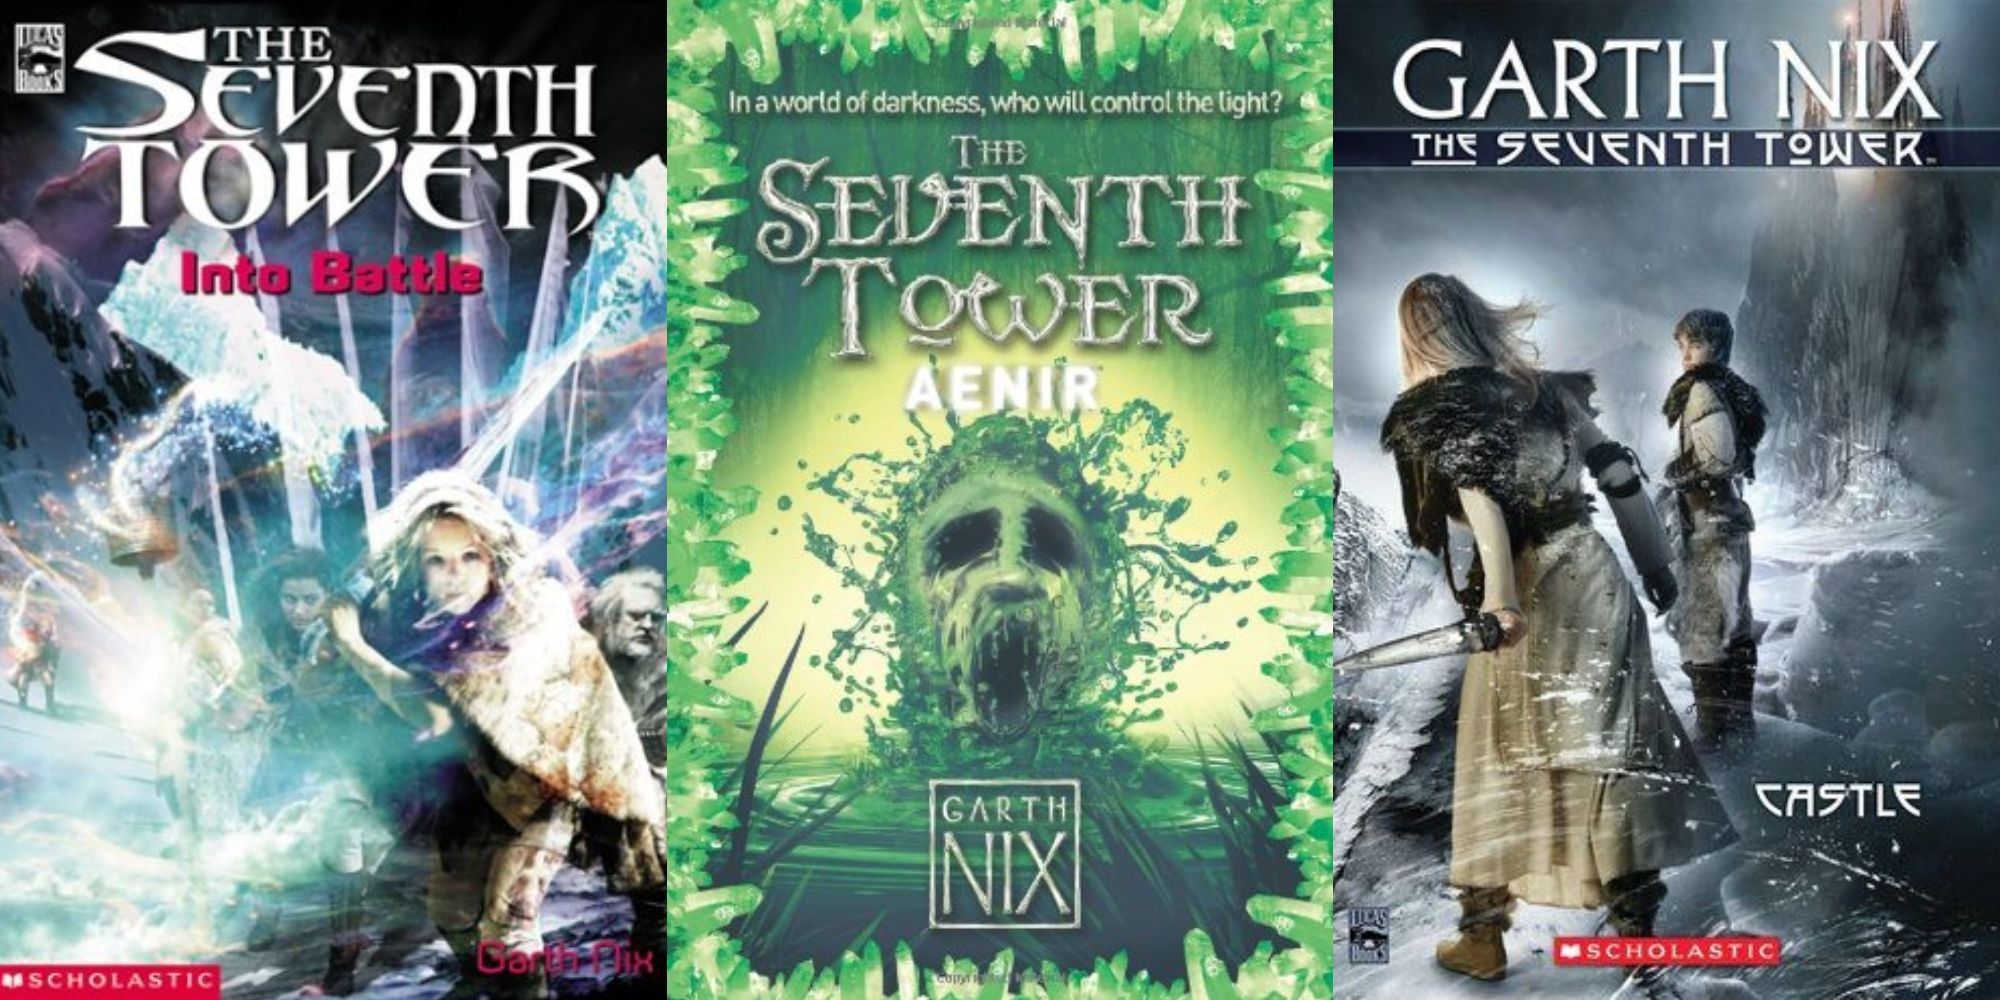 Covers of 3 The Seventh Tower books